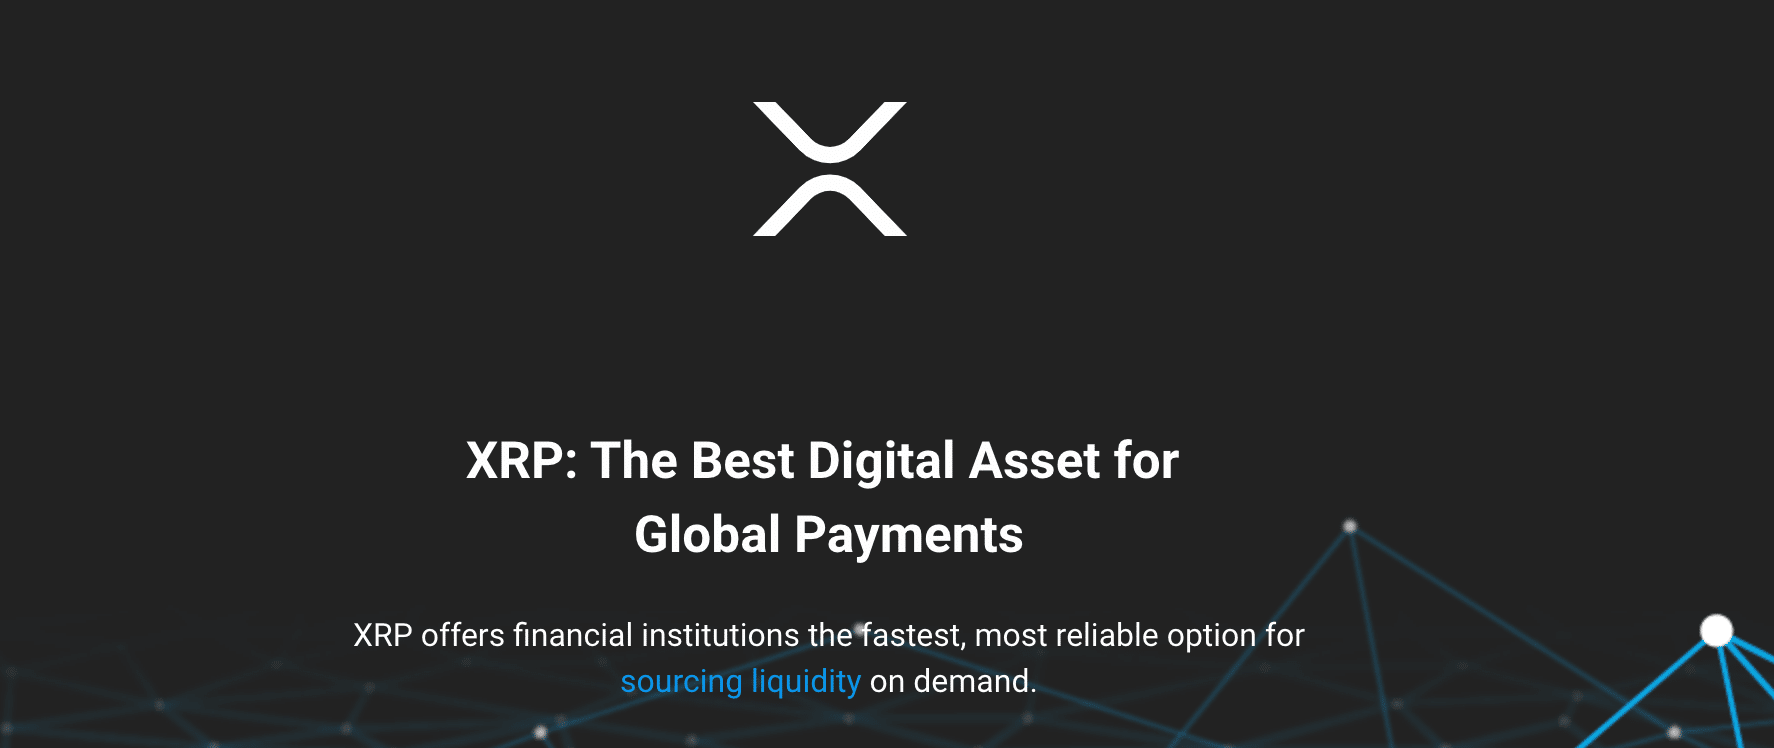 invest in XRP - xrp price predictions